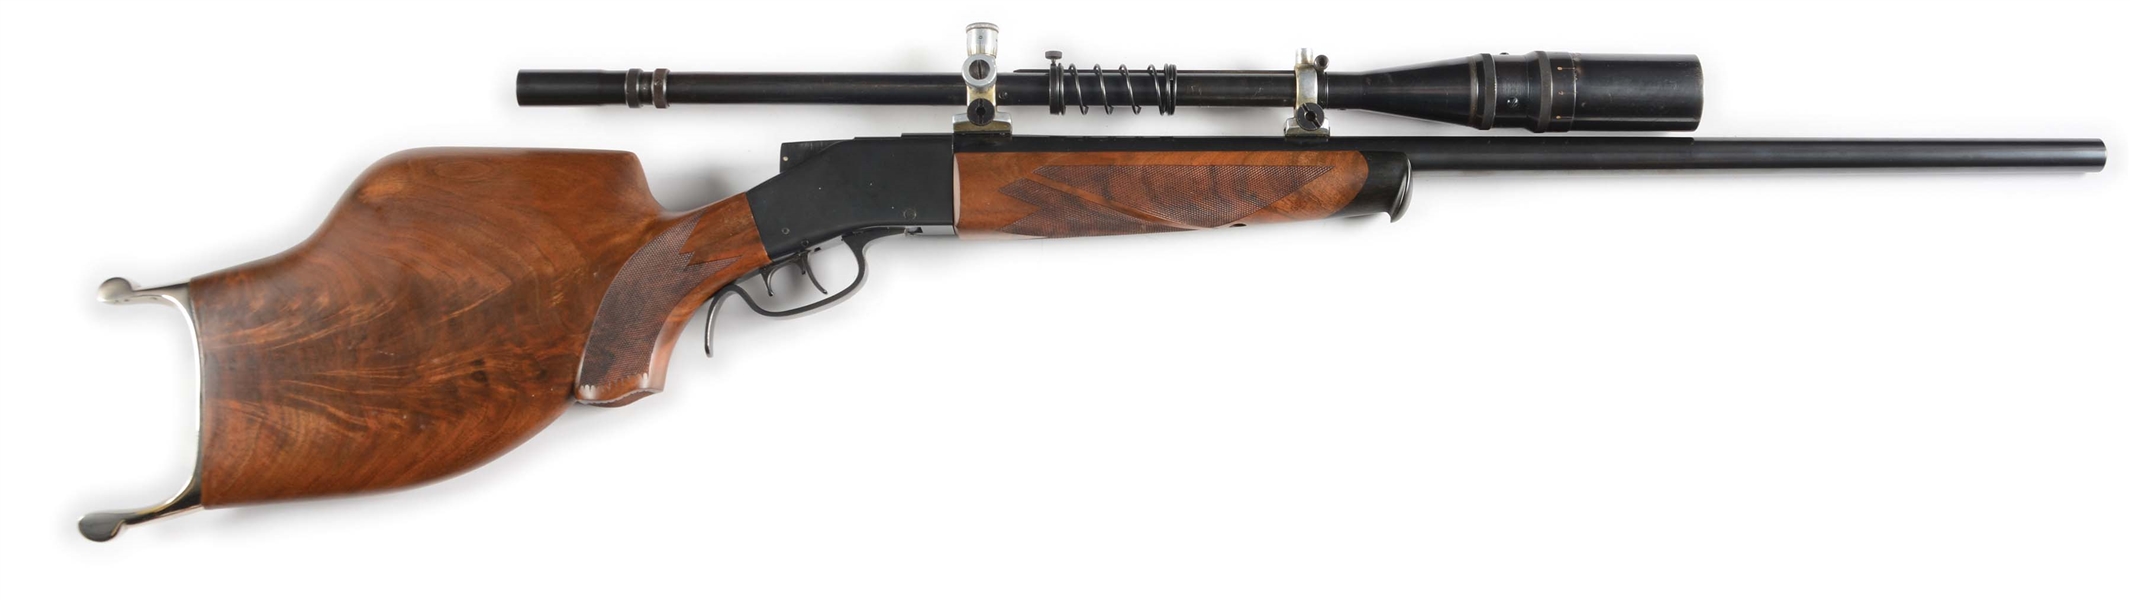 (M) HARRIMAN-BORCHARDT REPRODUCTION SINGLE SHOT RIFLE SERIAL NUMBER 1 WITH UNERTL SCOPE.